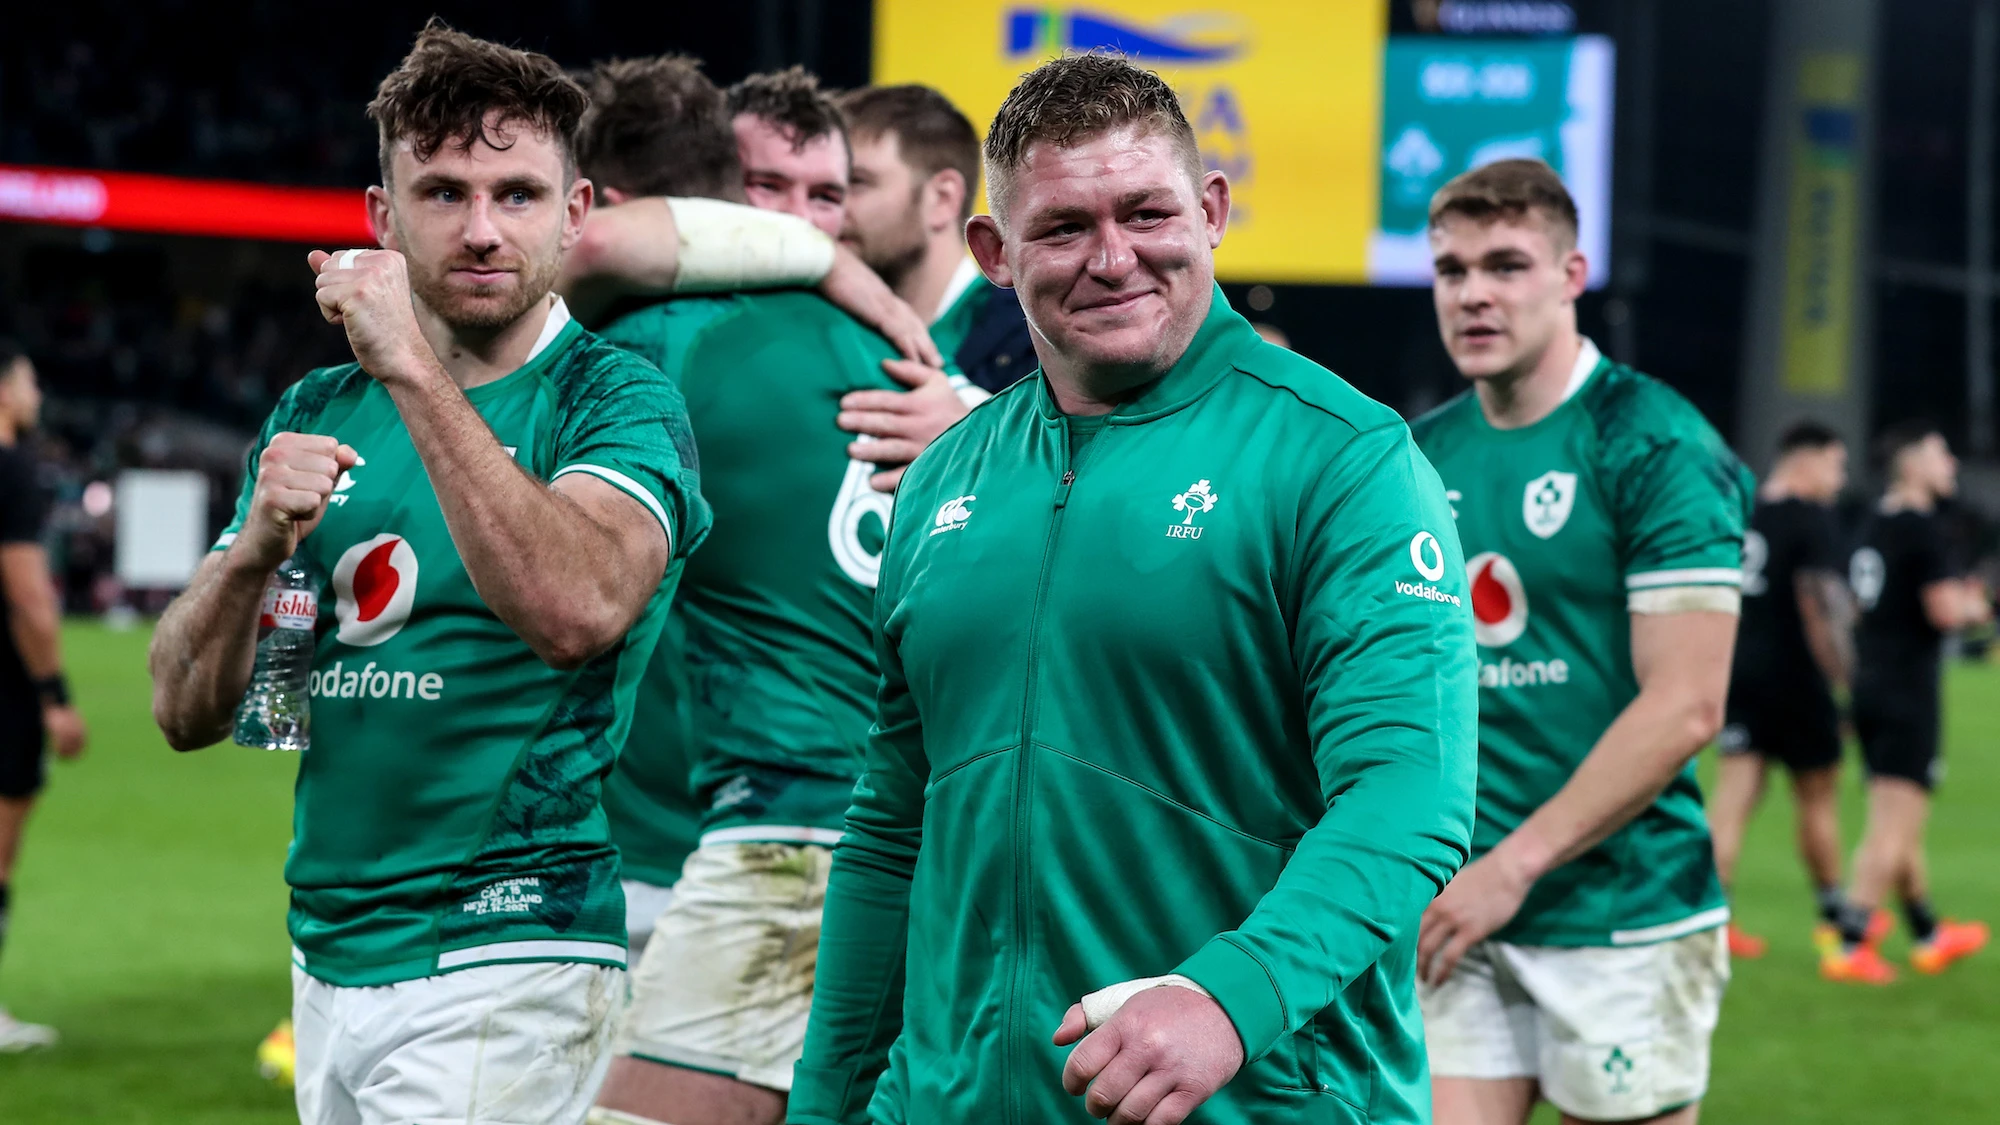 Tadhg Furlong celebrates after the game 13/11/2021